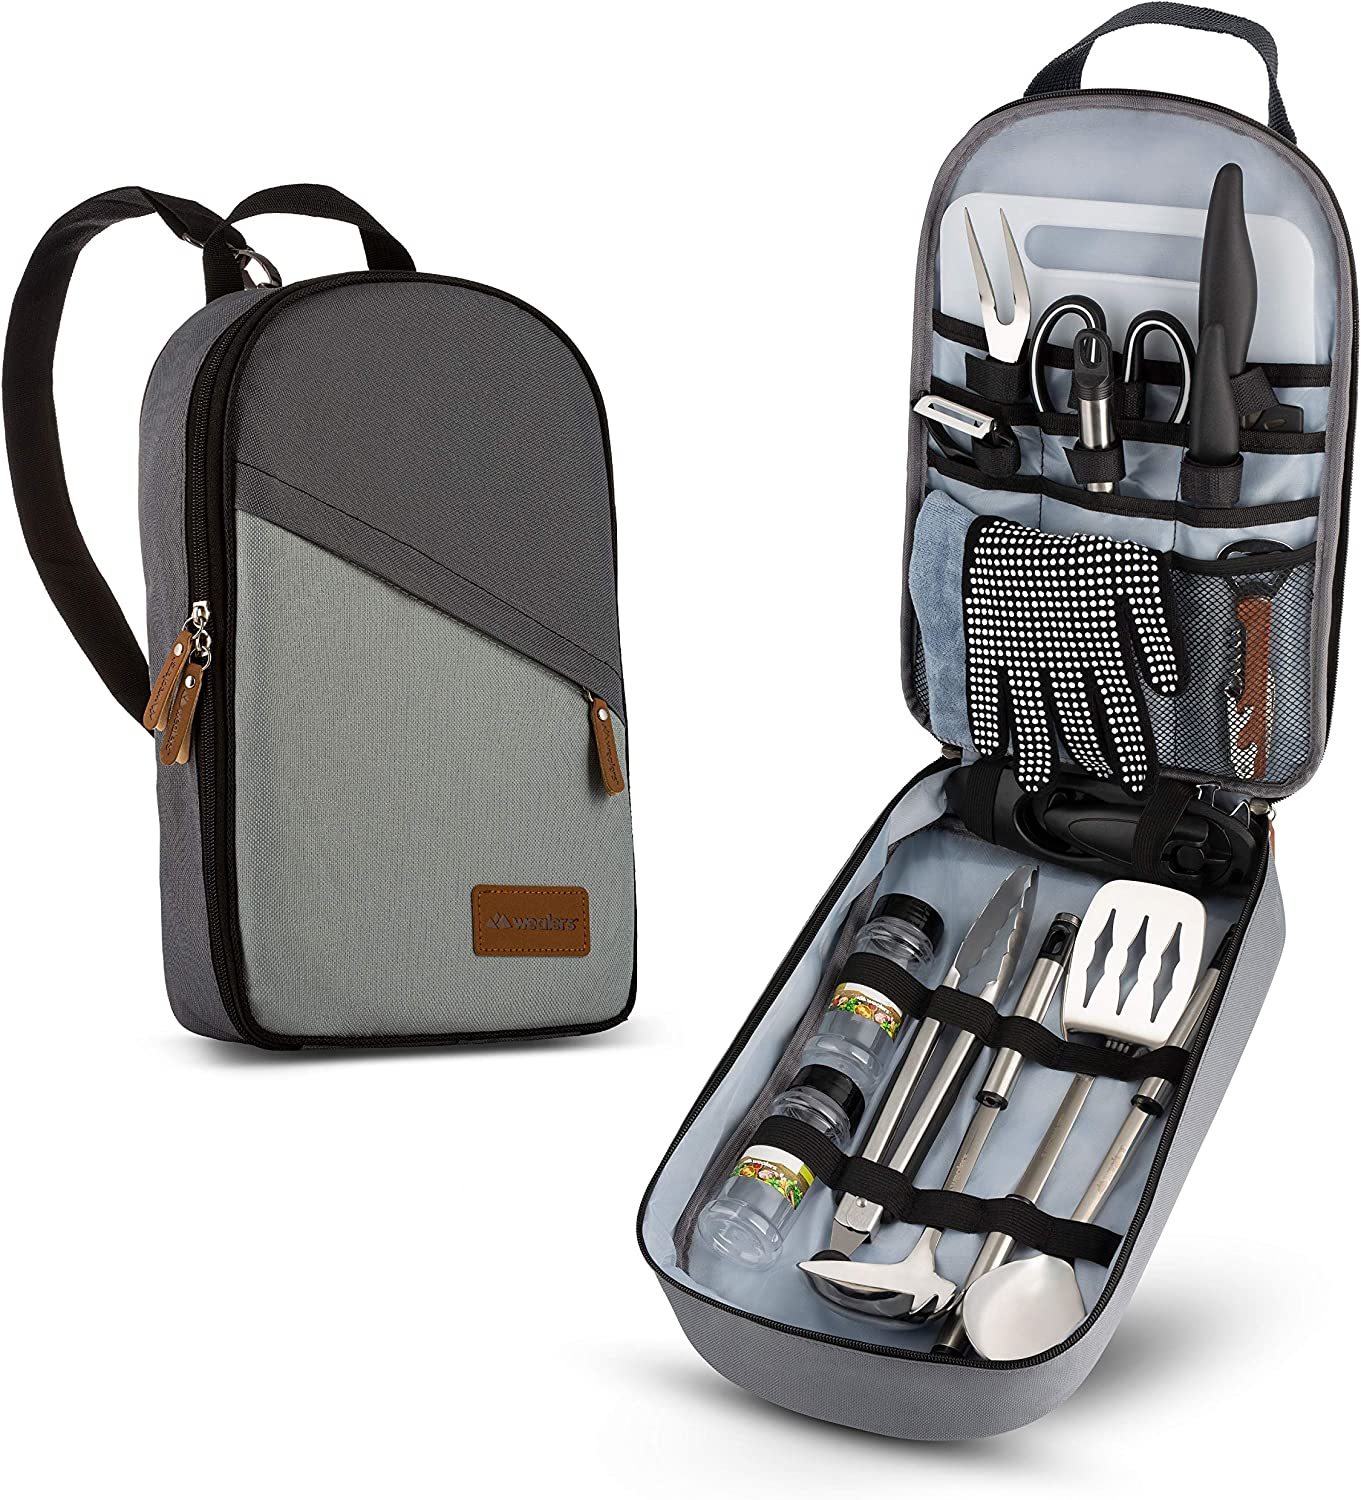 Primary image for Camp Kitchen Cooking Utensil Set Travel Organizer Grill Accessories Portable